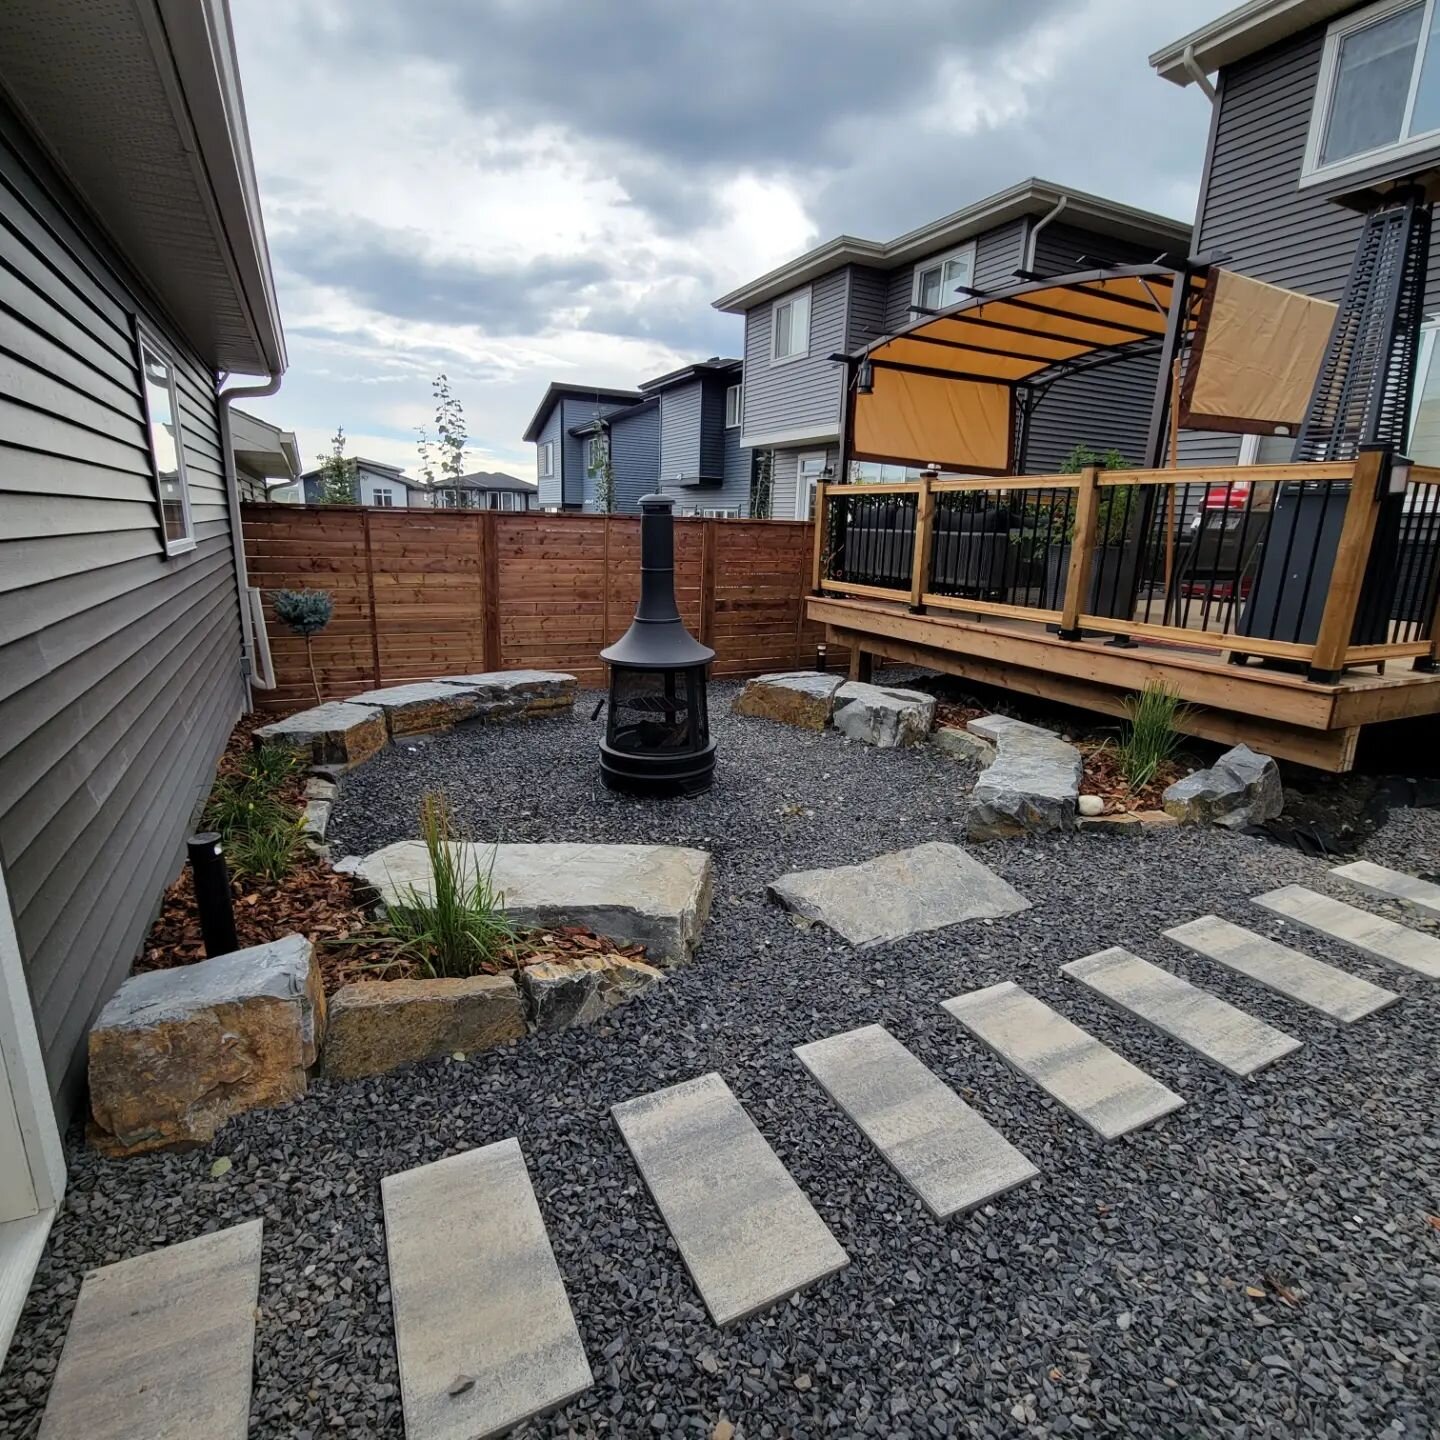 New cozy backyard with our zero maintenance package! 

Call us today for a free estimate.

4034717588

#yournaturalstonespecialists #kootneybrownstone #boulders #cochrane #landscaping #construction #yyclandscpaing #calgary #calgarylandacaping #firepl